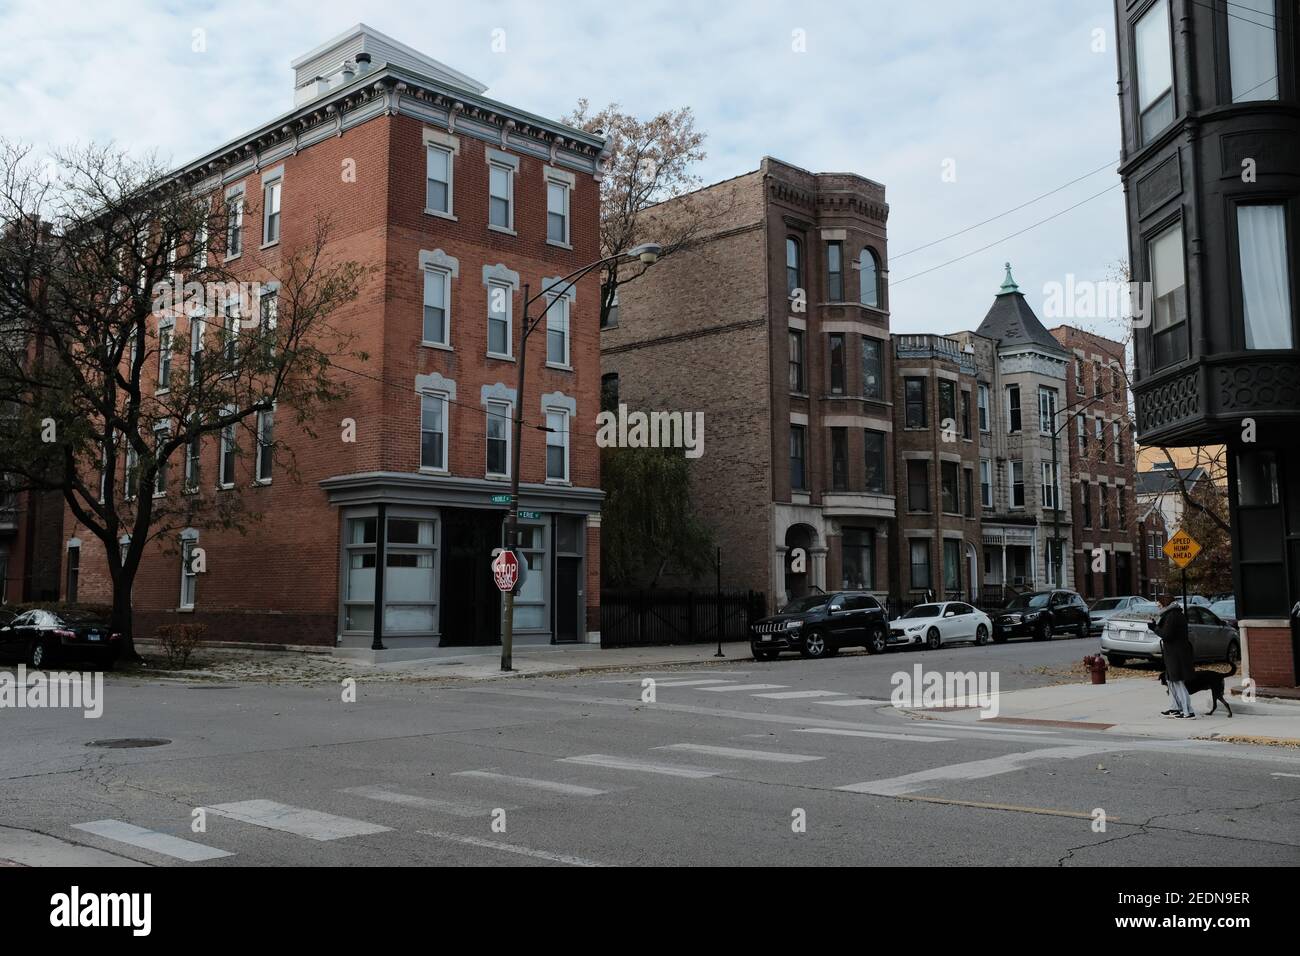 WEST TOWN, CHICAGO - 9TH NOVEMBER 2019: Cross roads at West Town in Chicago. Stock Photo